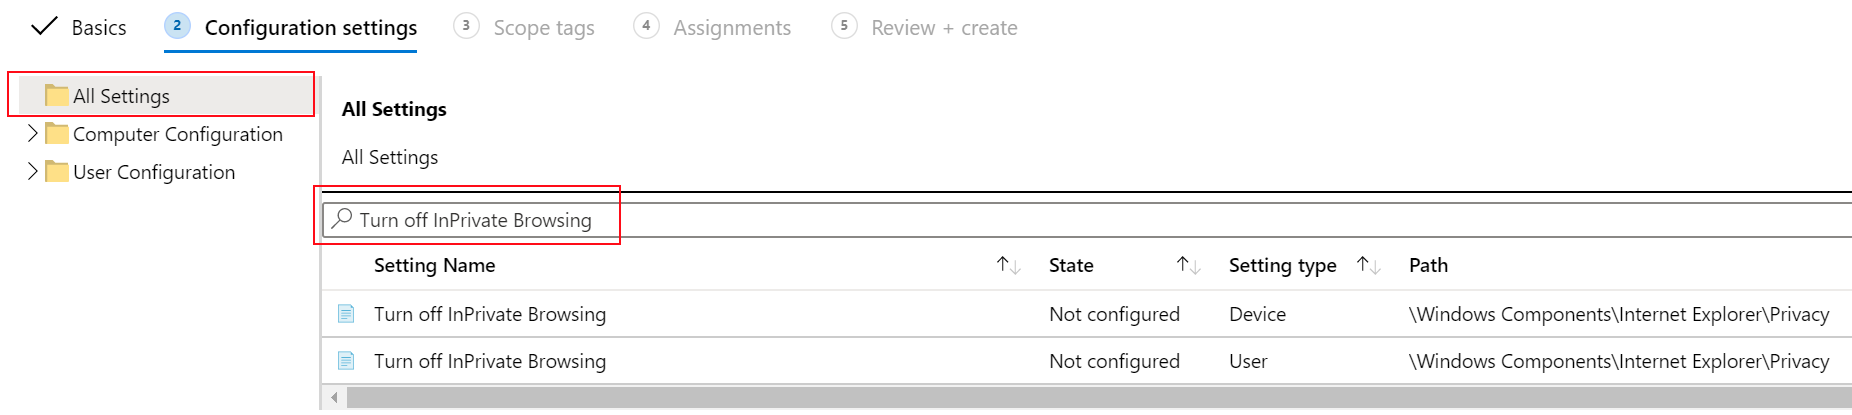 Screenshot that shows how to turn off InPrivate Browsing device policy in an administrative template in Microsoft Intune.